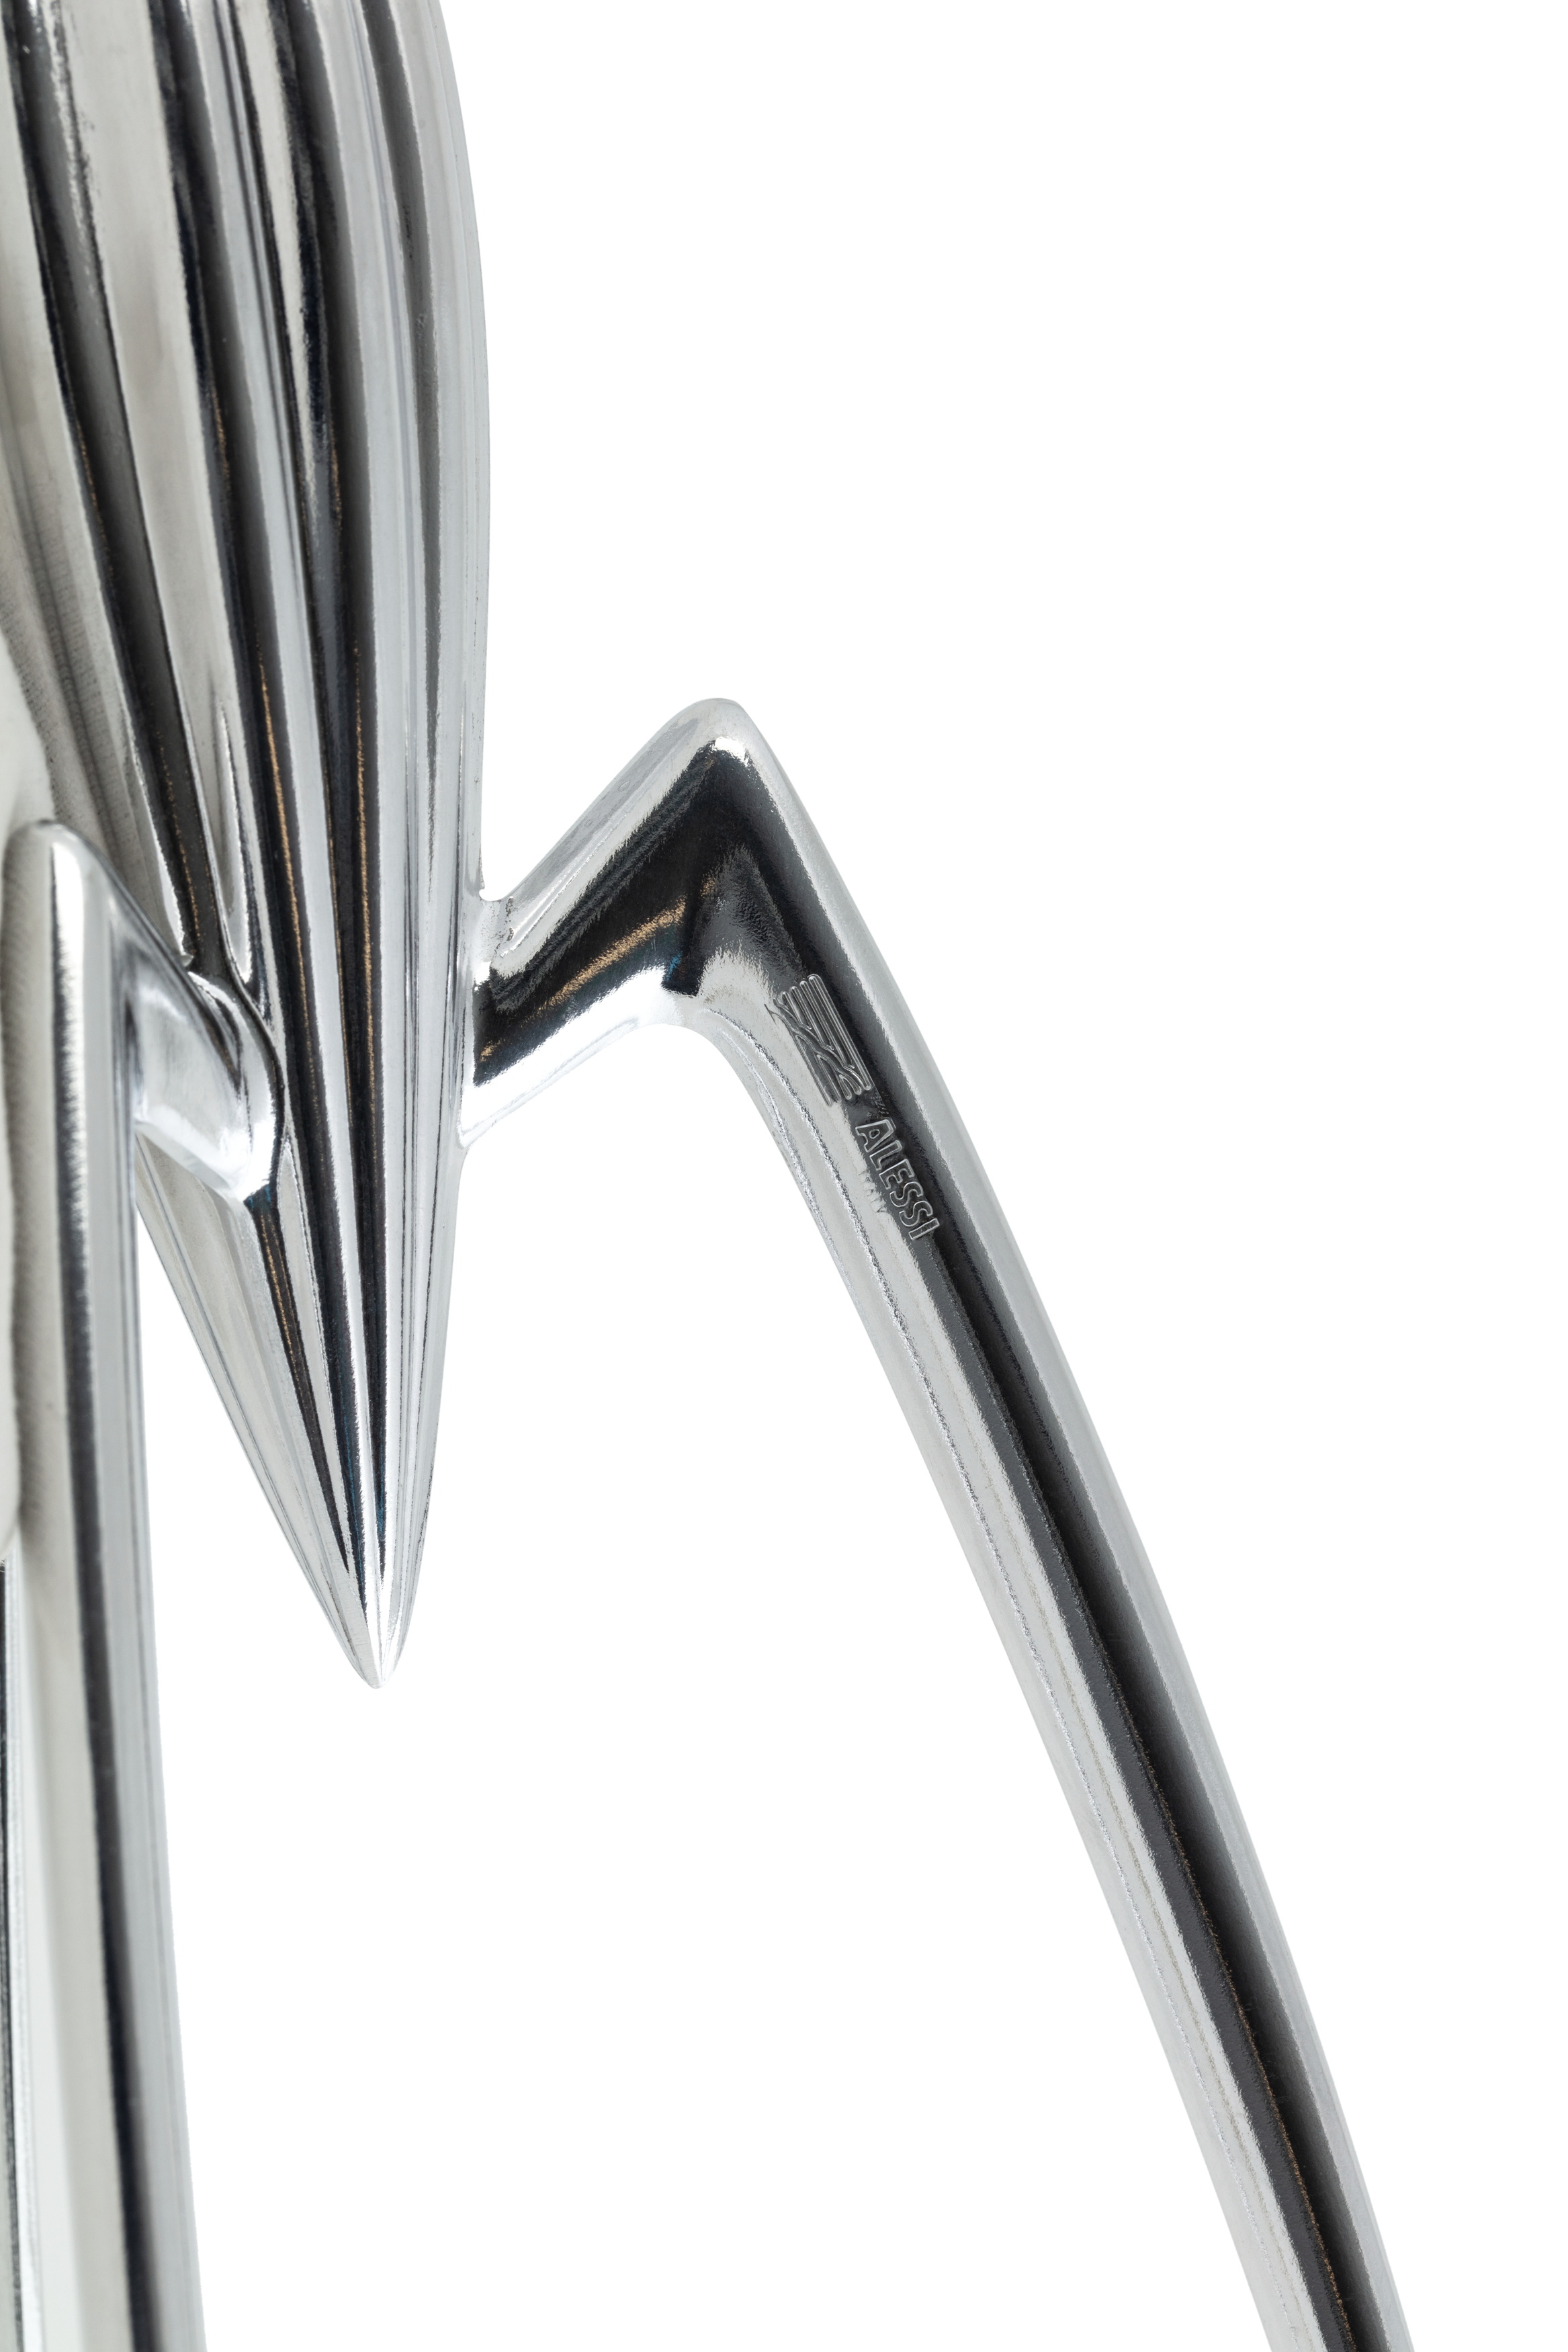 'Juicy Salif' lemon squeezer by Philippe Starck for Alessi